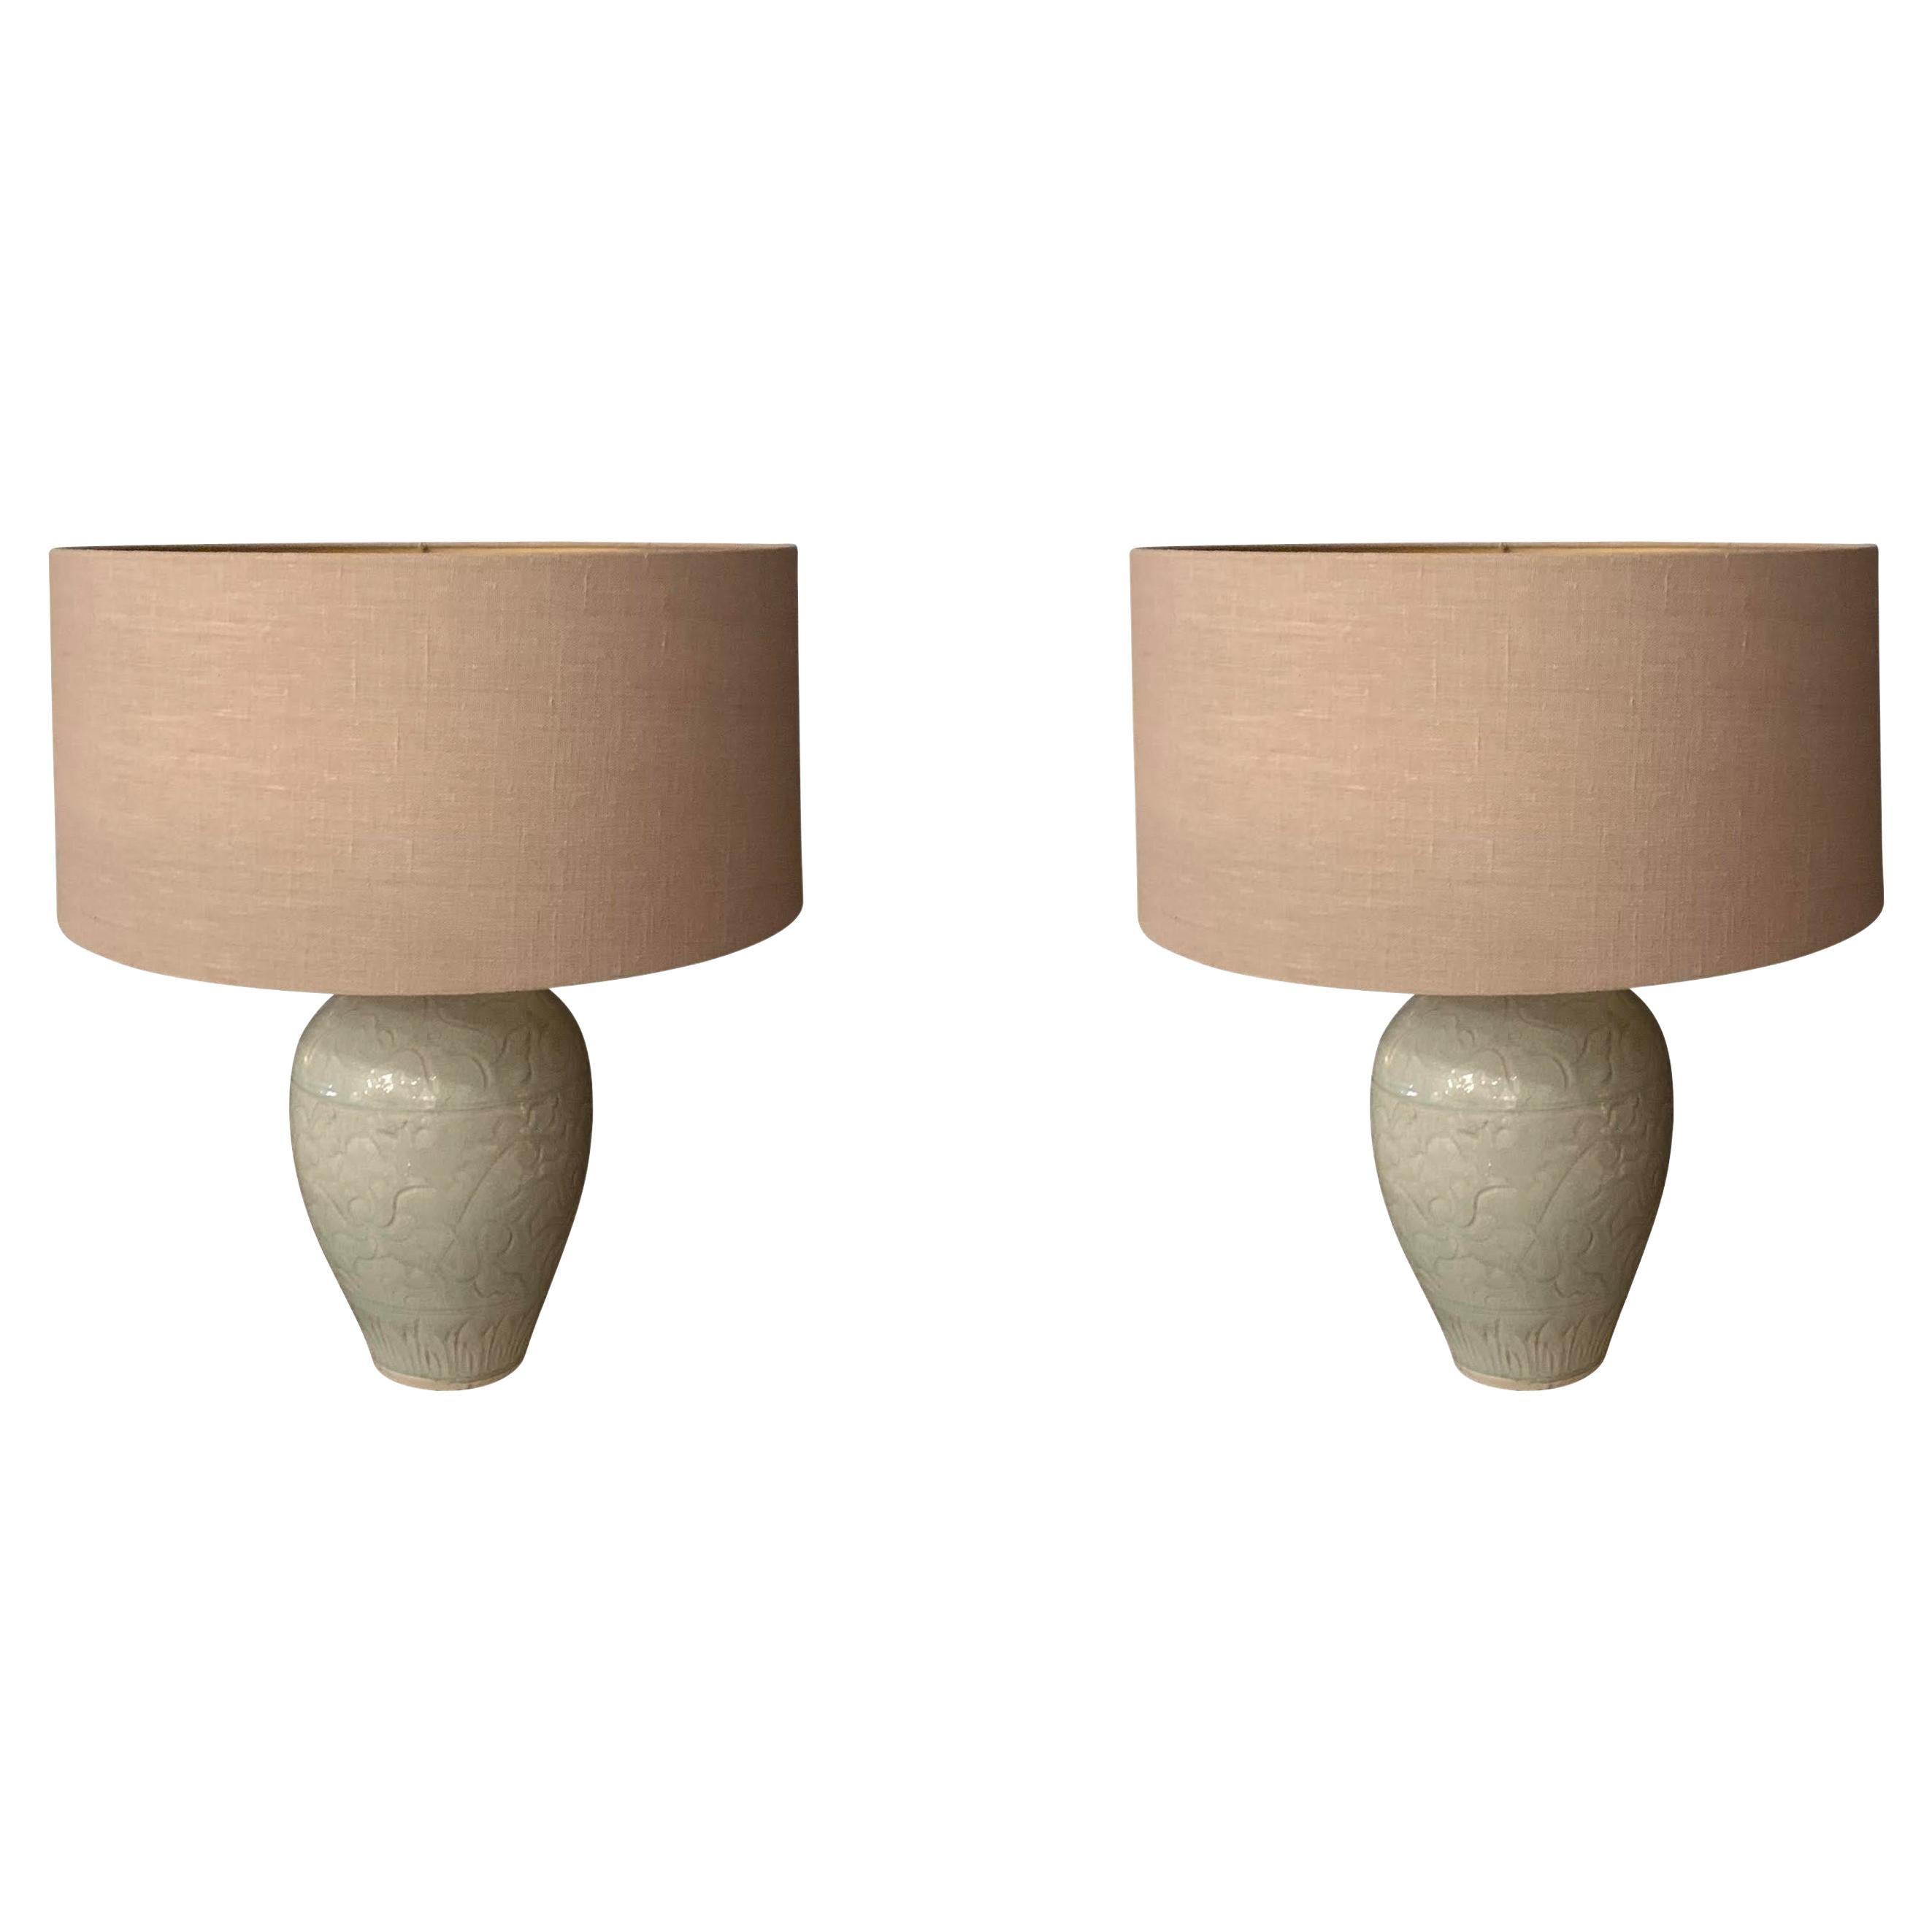 Pale Celedon Patterned Pair Table Lamps With Shades, Contemporary, China